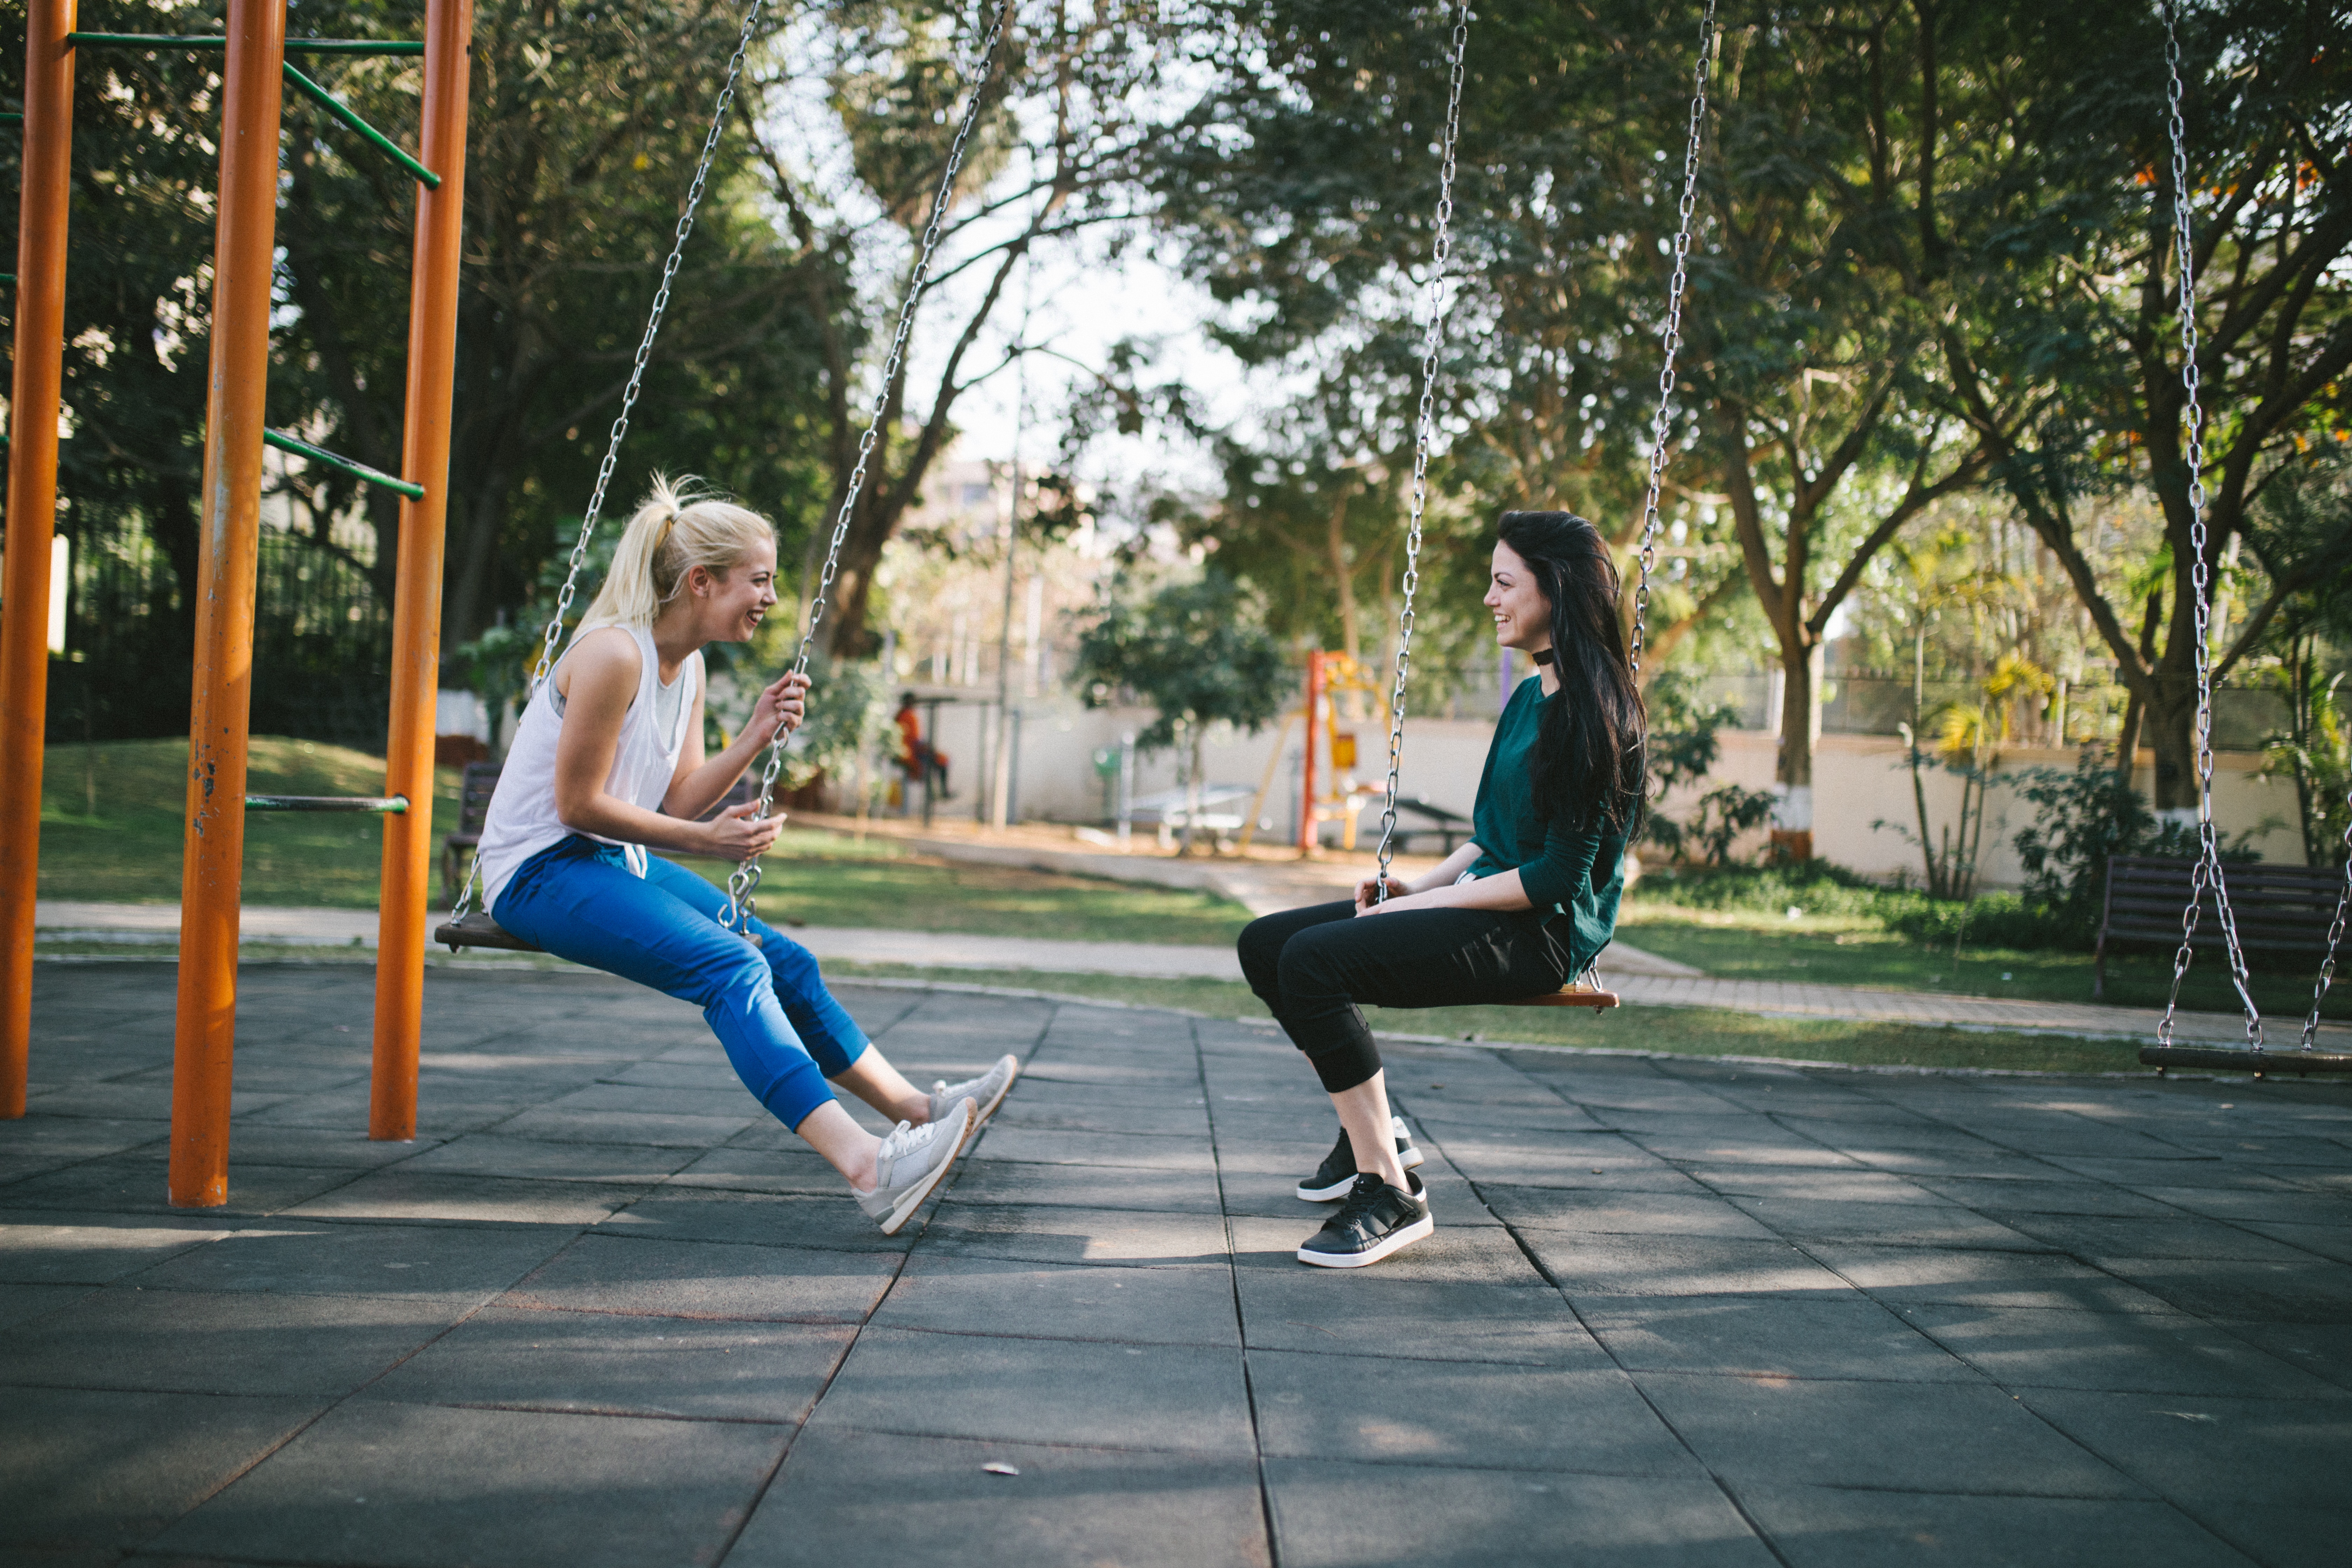 Two friends sitting on swings at a park, laughing and facing each other.